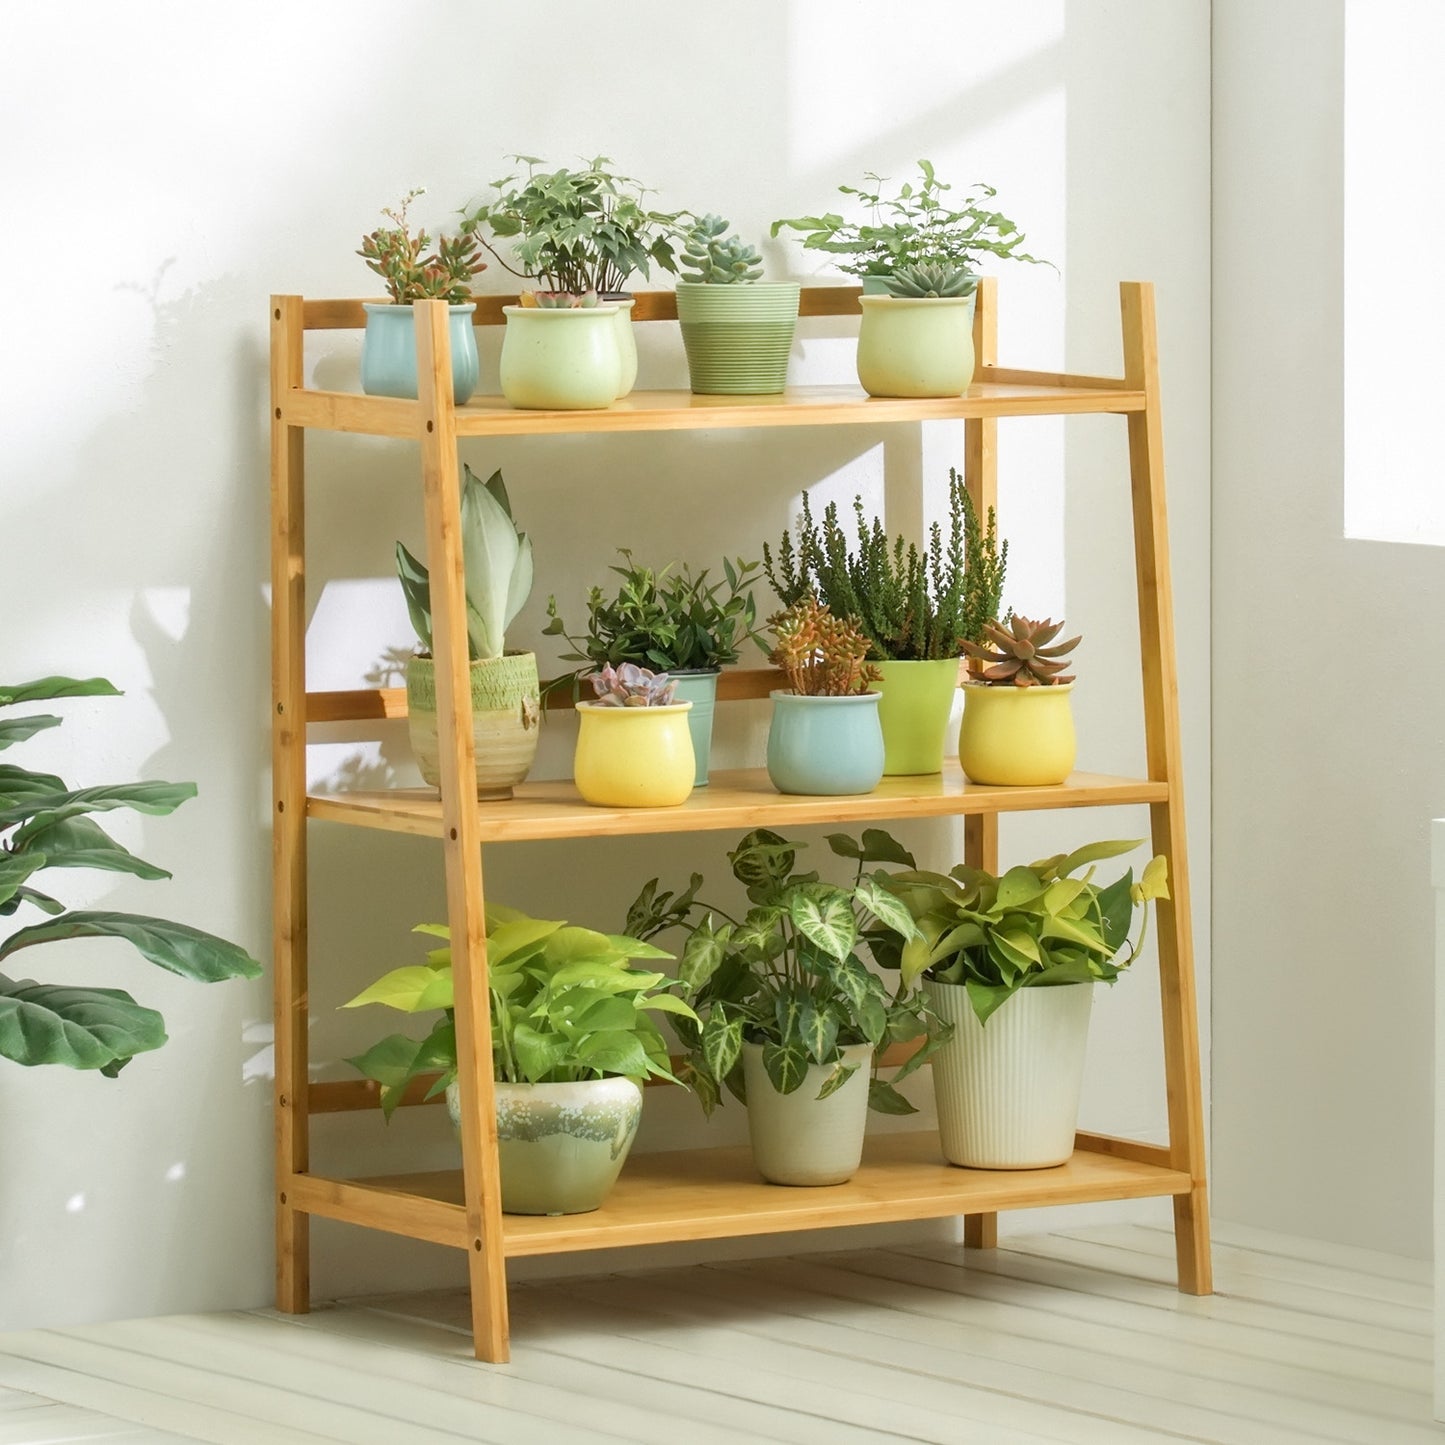 Simplified Trapezoid Multi-Functional Flower Plant Rack - 3 Tier - Natural